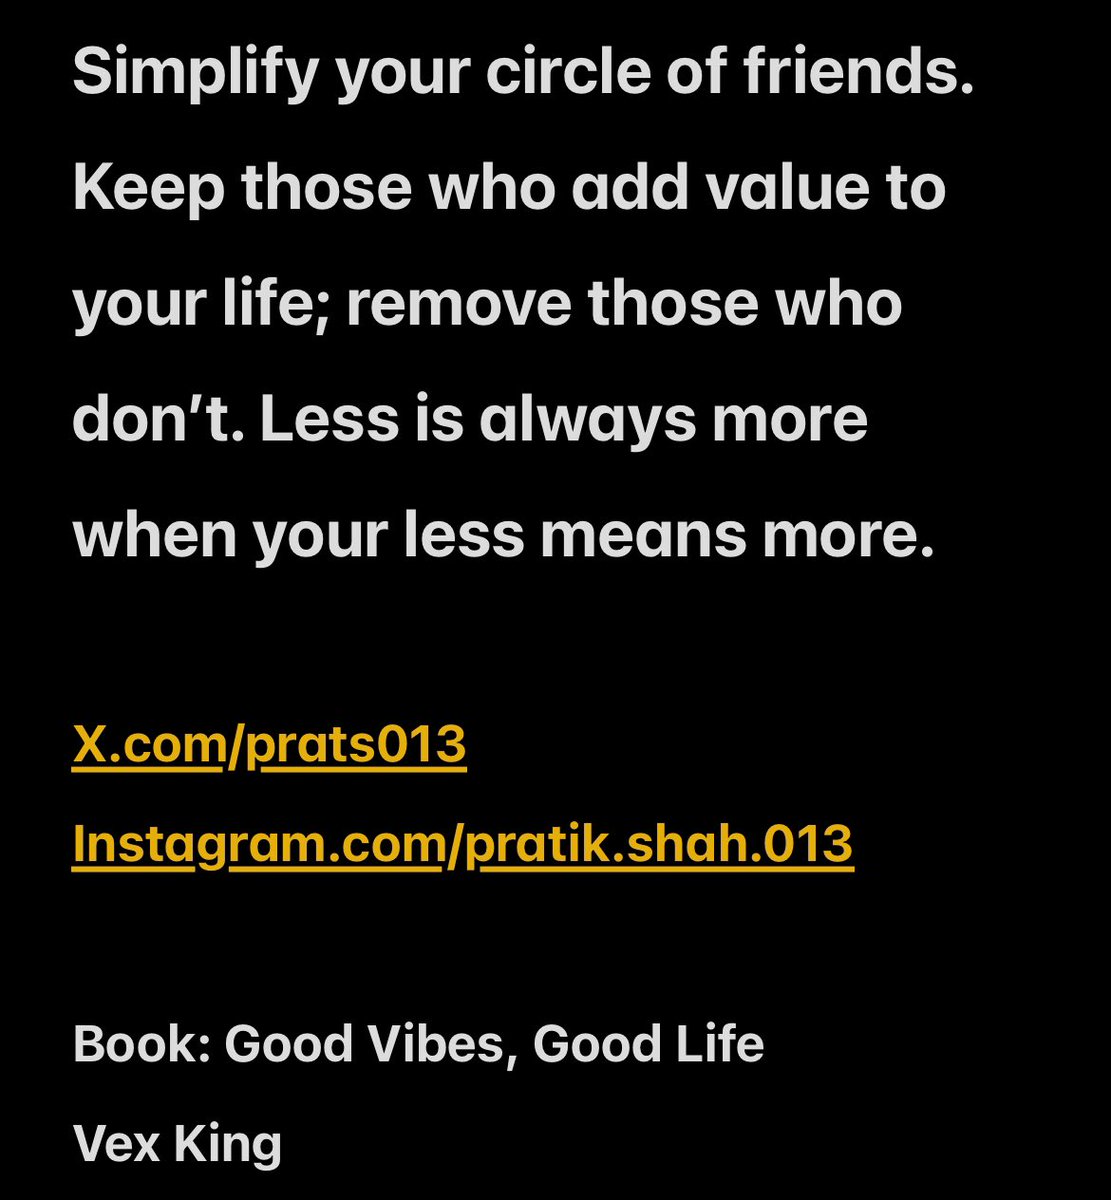 #vexwwksingbook #goodvibesgoodlife #books #readingtime #reading #library #wisdom #learning #knowledge #simplify #circle #friends #add #value #Life #Less #is #always #more #readersgonnaread #readmore #Friday #morning